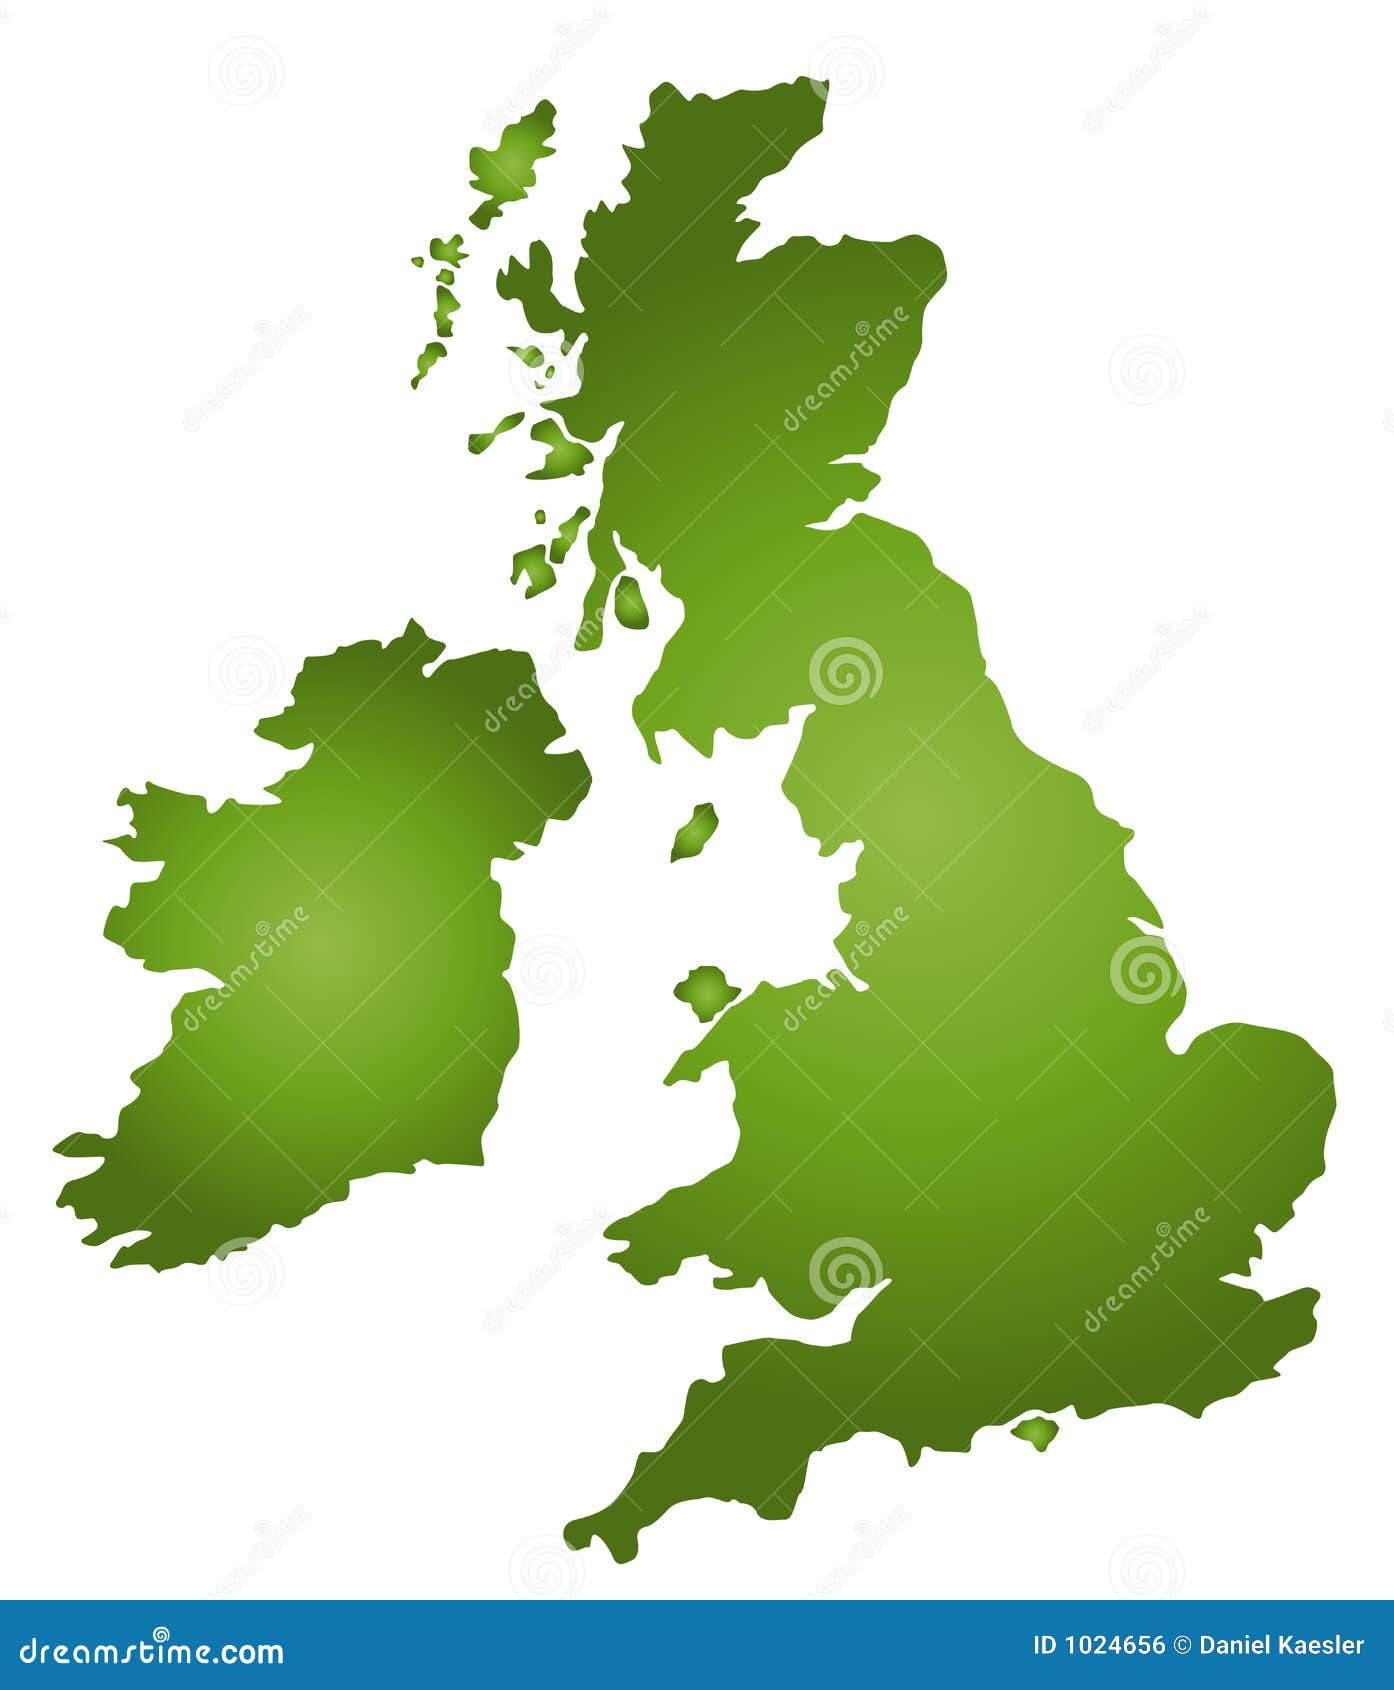 free clipart map of england - photo #2